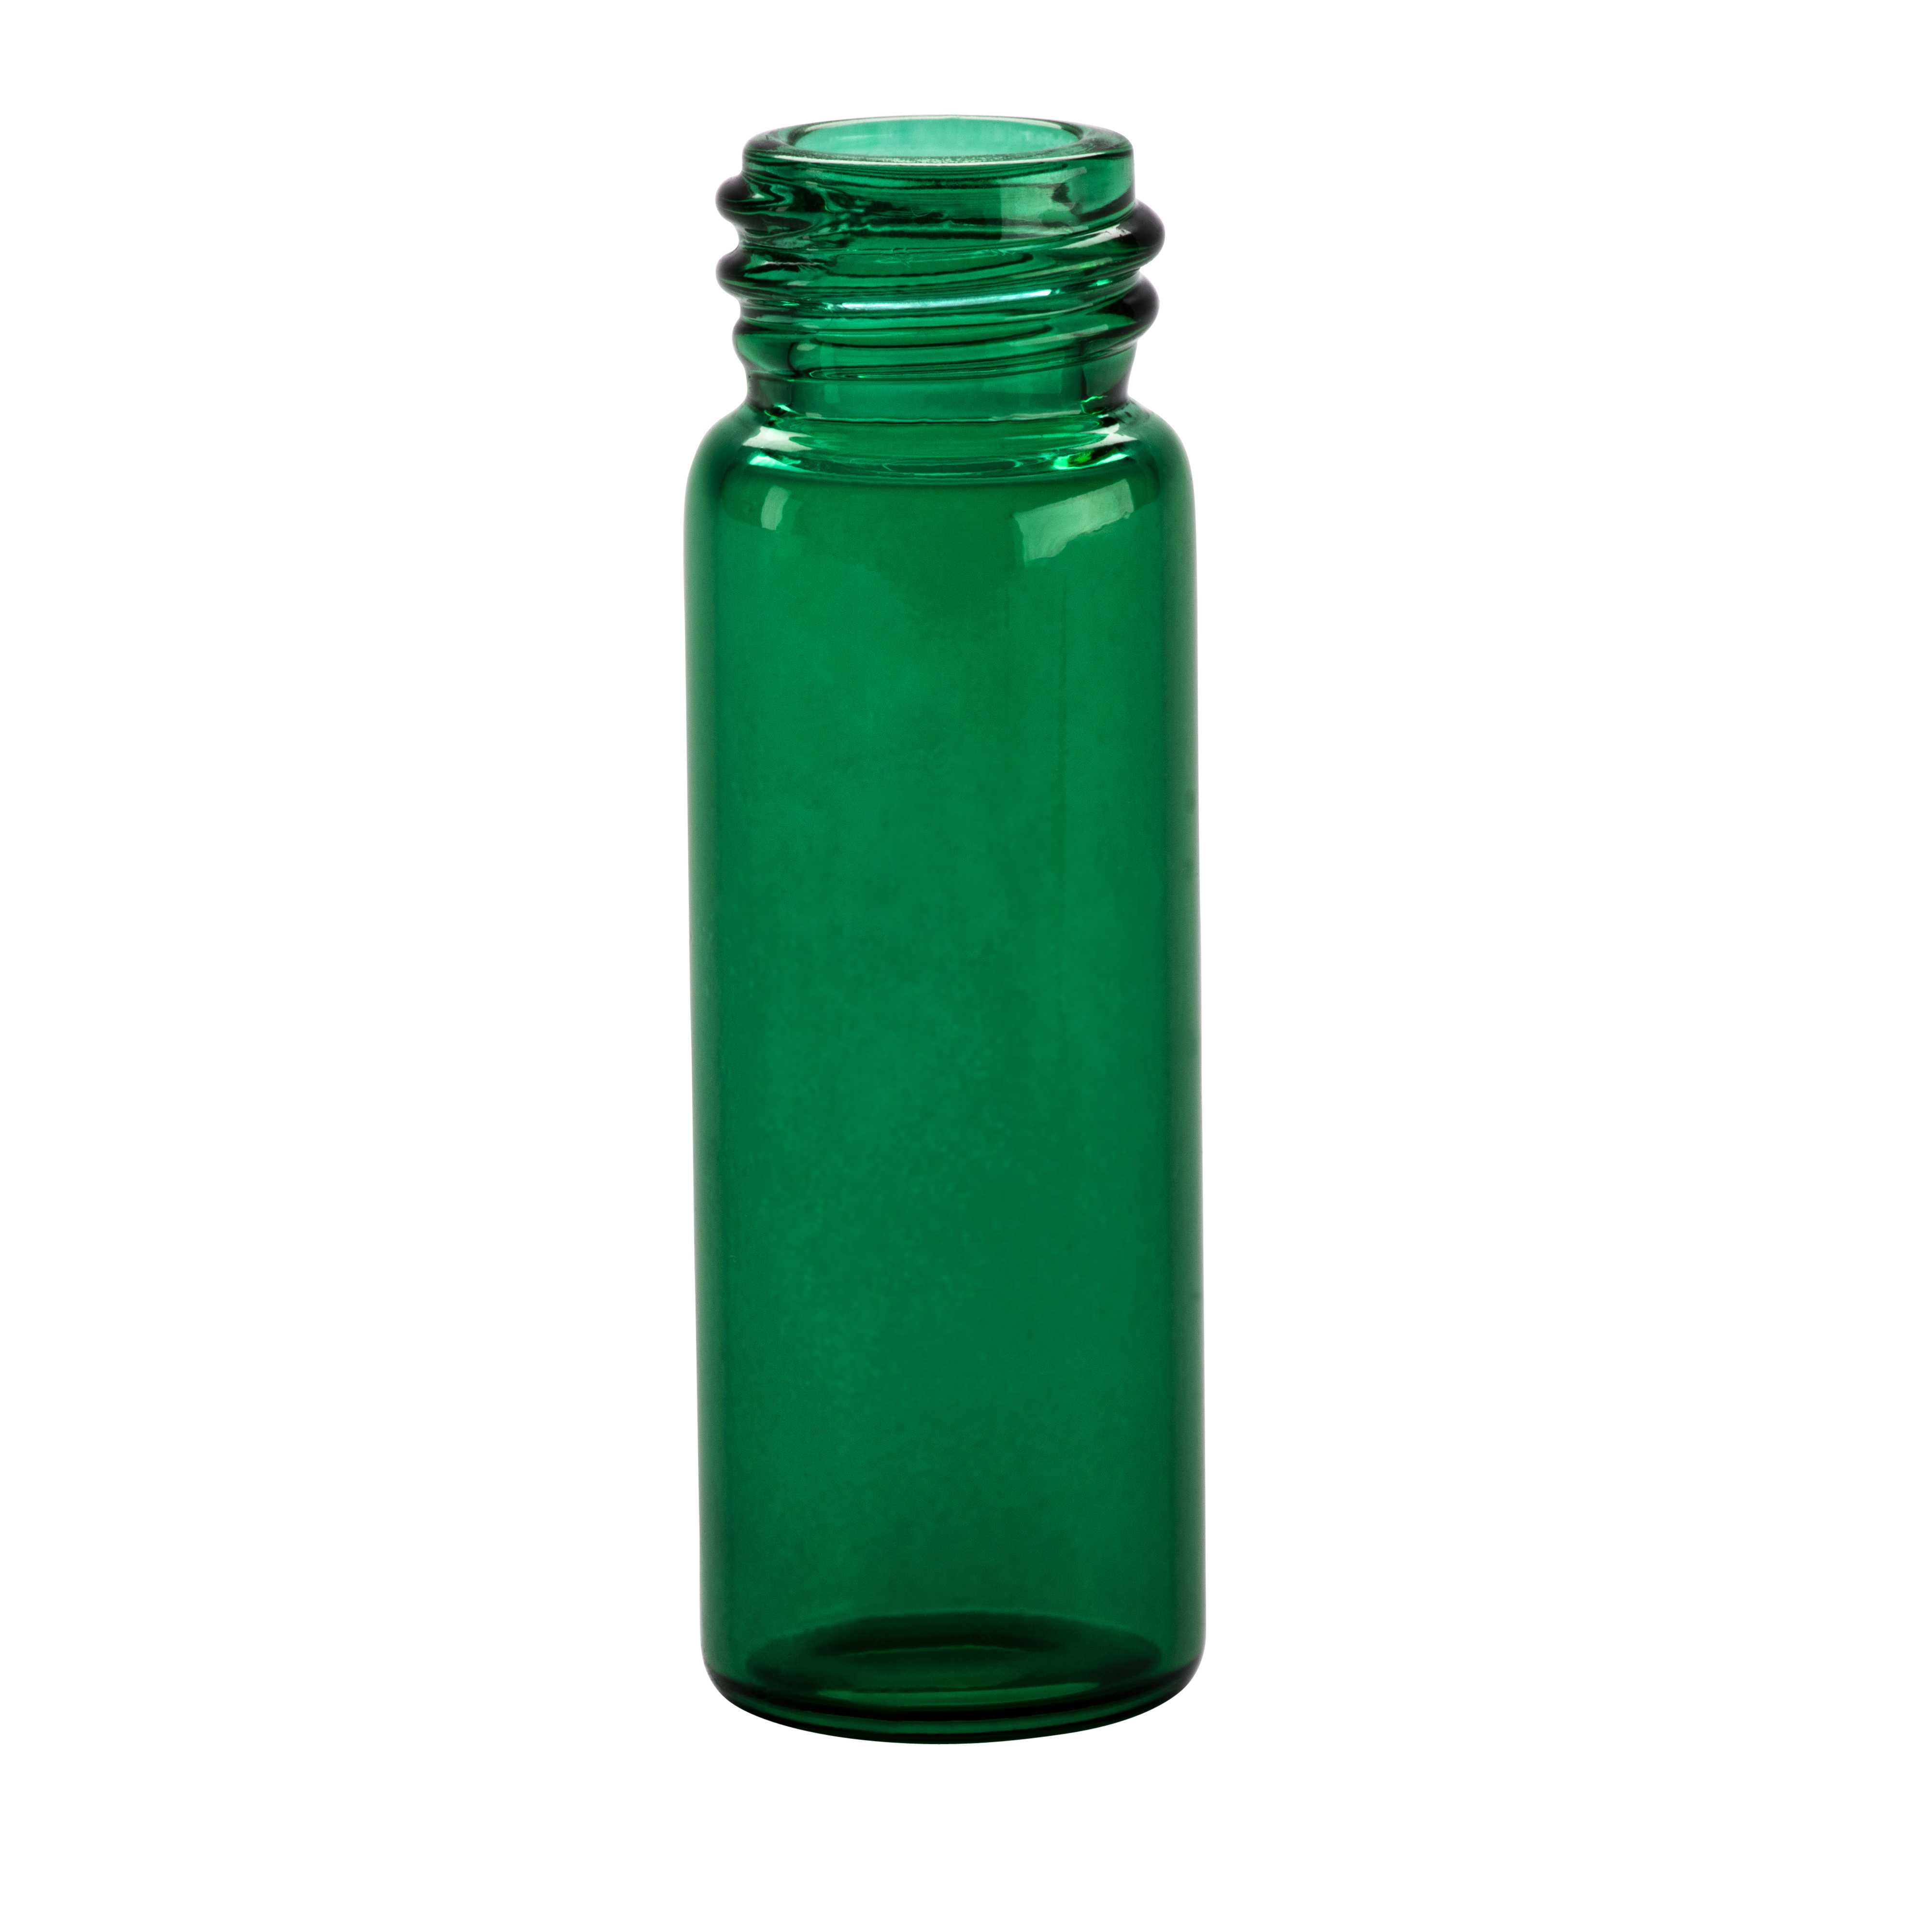 Green colored container with screw top